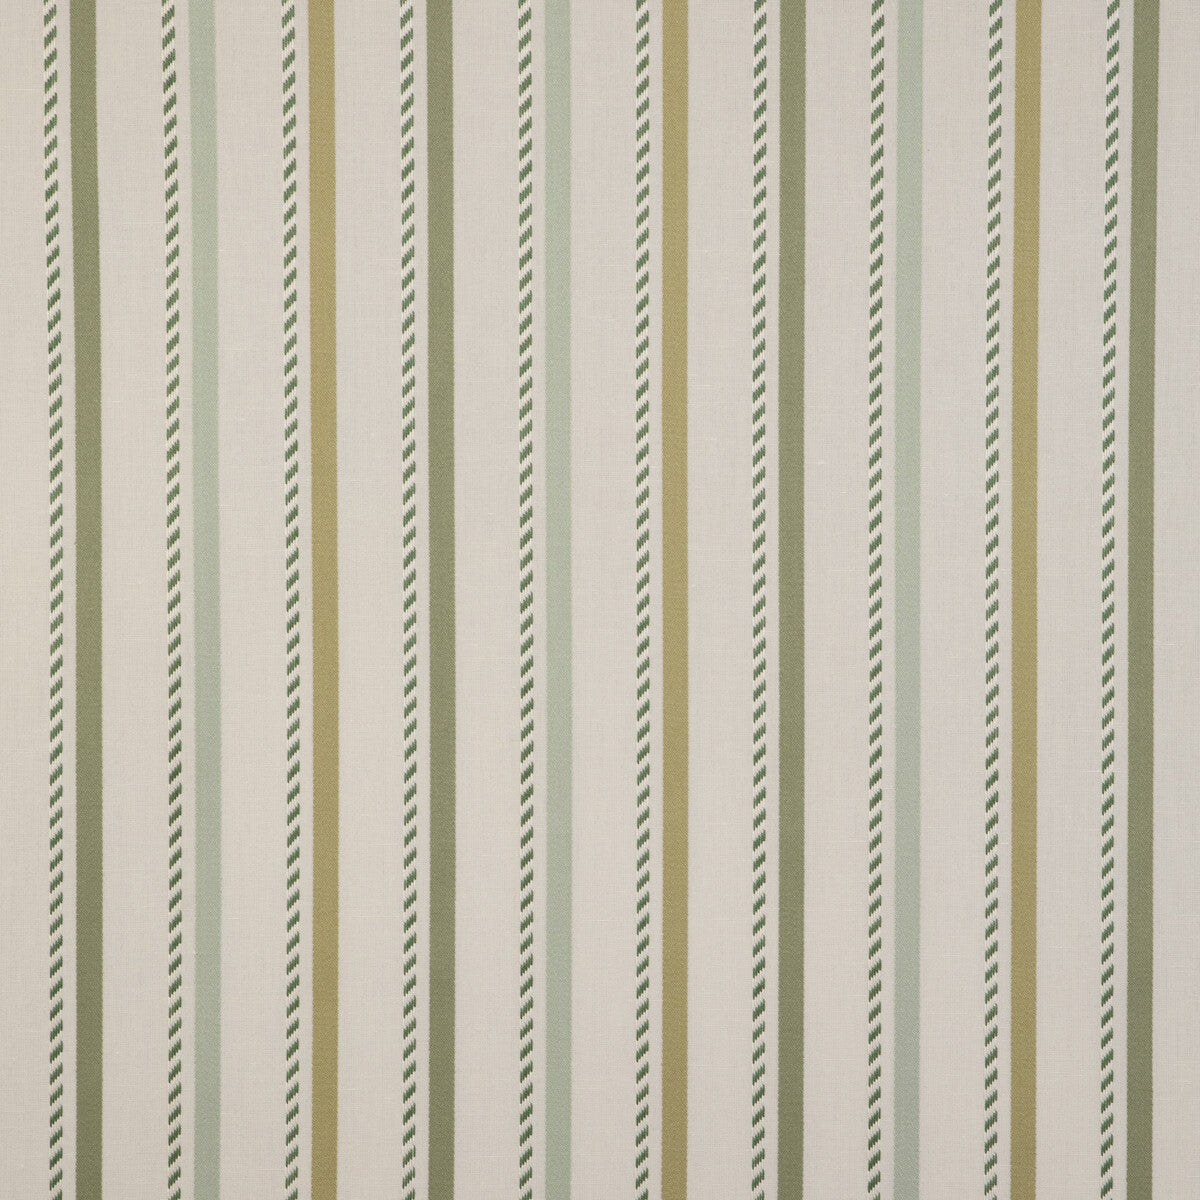 Buxton Stripe fabric in mist/kiwi color - pattern 2023106.353.0 - by Lee Jofa in the Highfield Stripes And Plaids collection